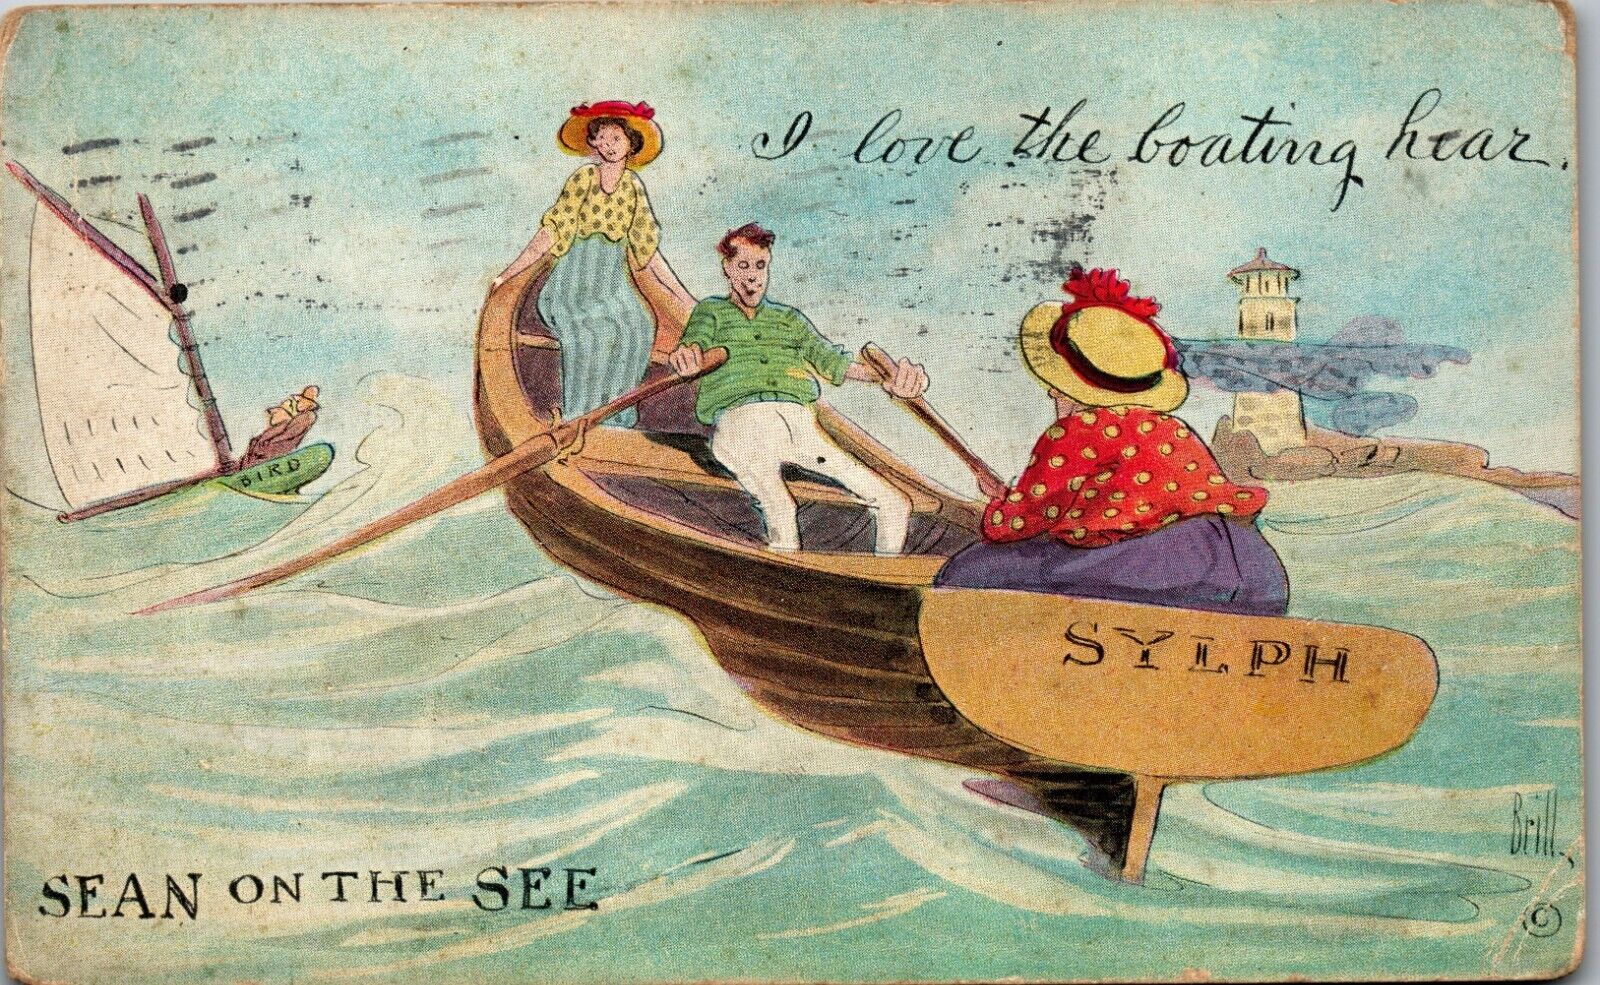 Artist Signed Brill -I love boating - Sean on the See Sylph Vintage Postcard UU2